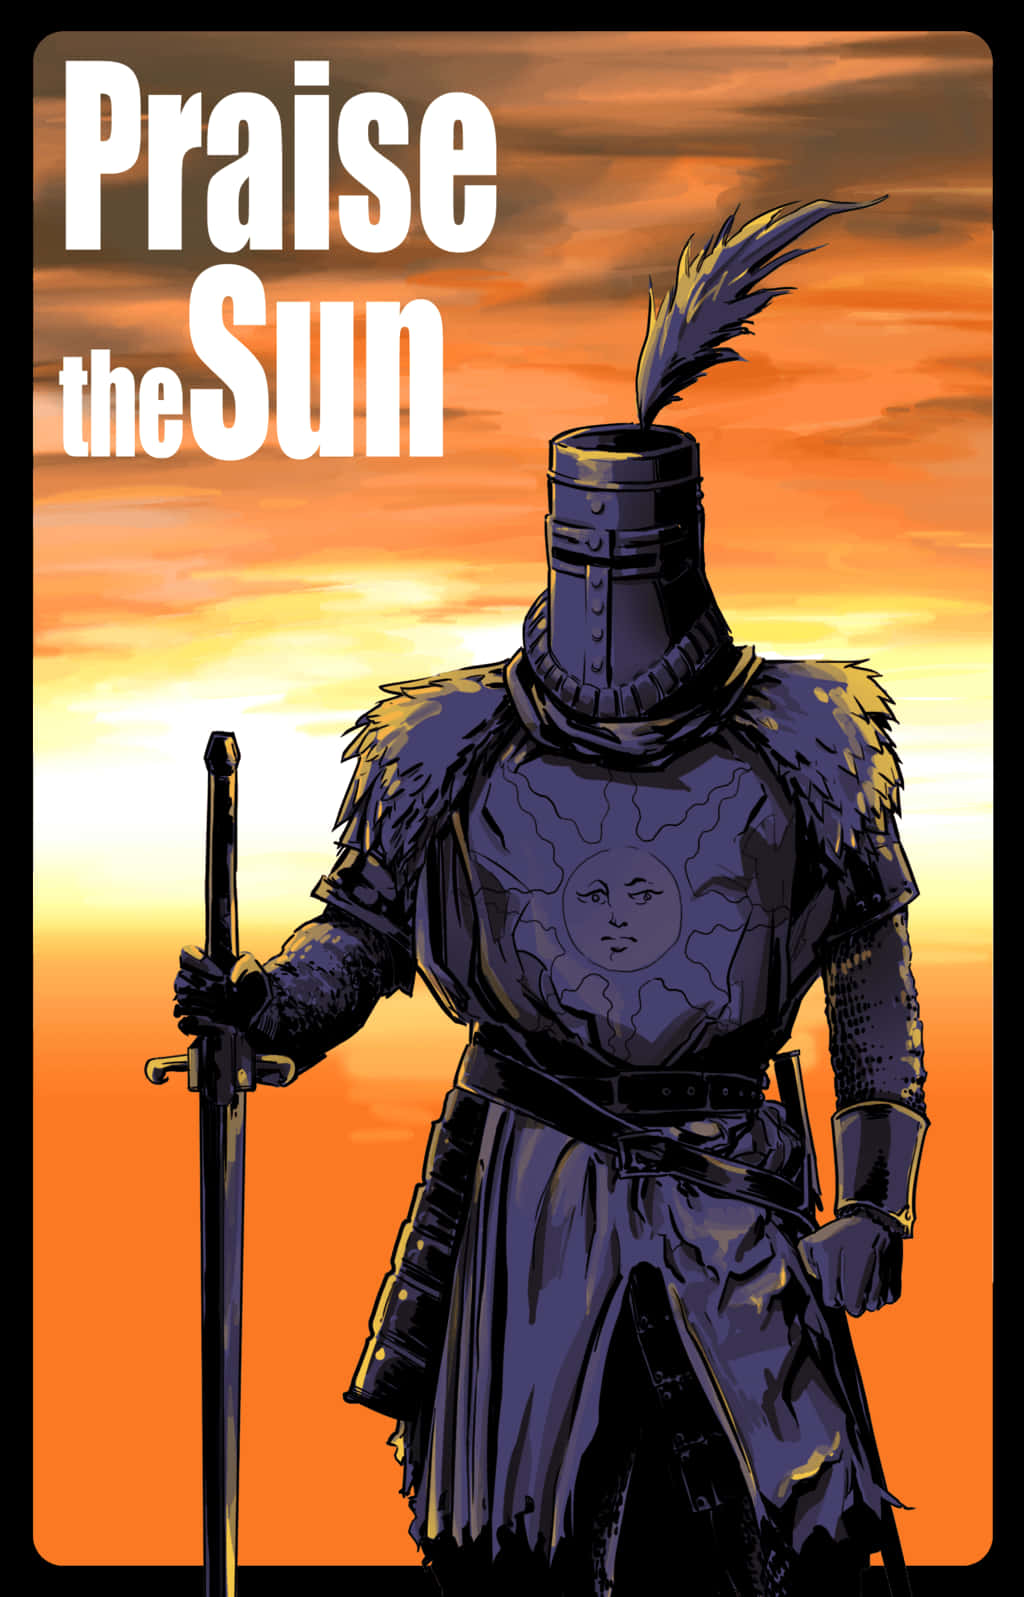 "The Chosen Undead, Solaire of Astora, lends his strength to the cause" Wallpaper